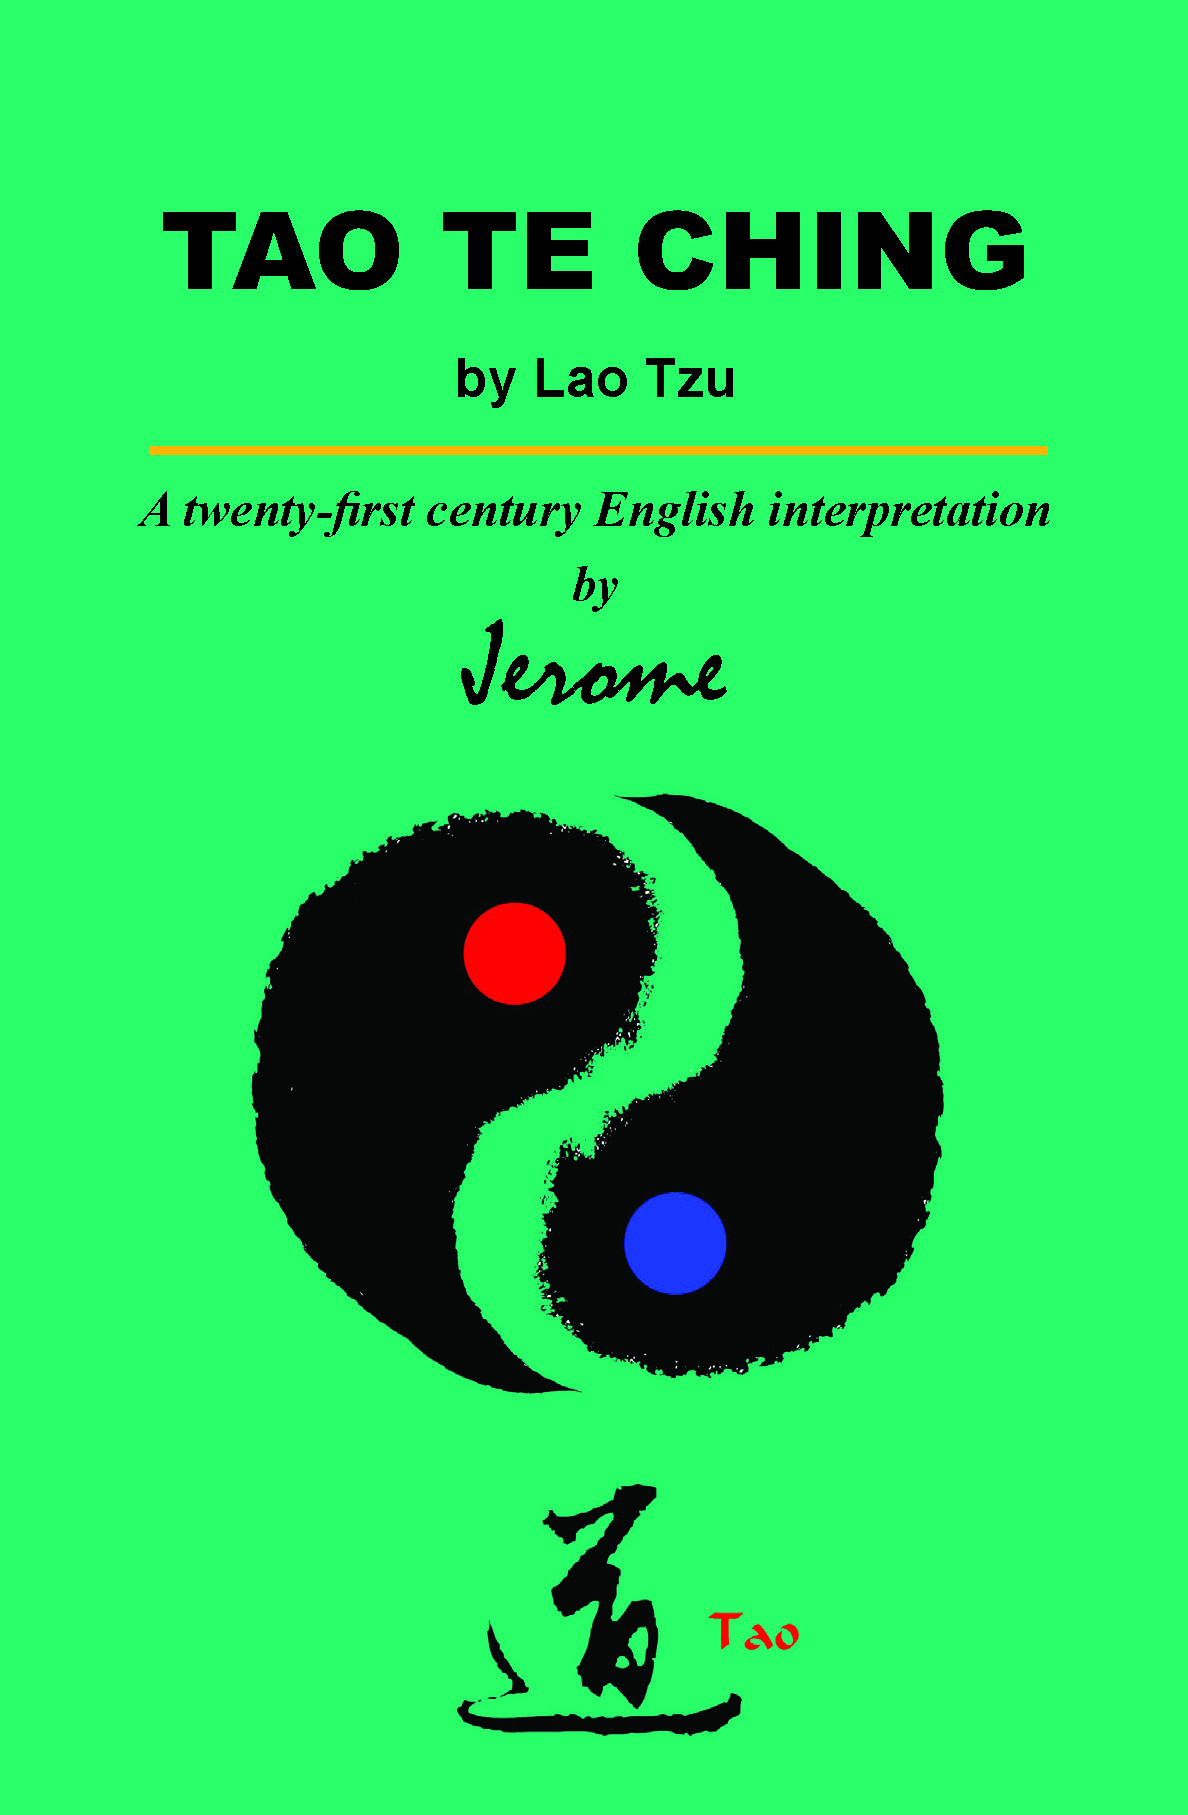 Contents of Tao Te Ching by Lao Tzu: A twenty-first century English interpretation by Jerome